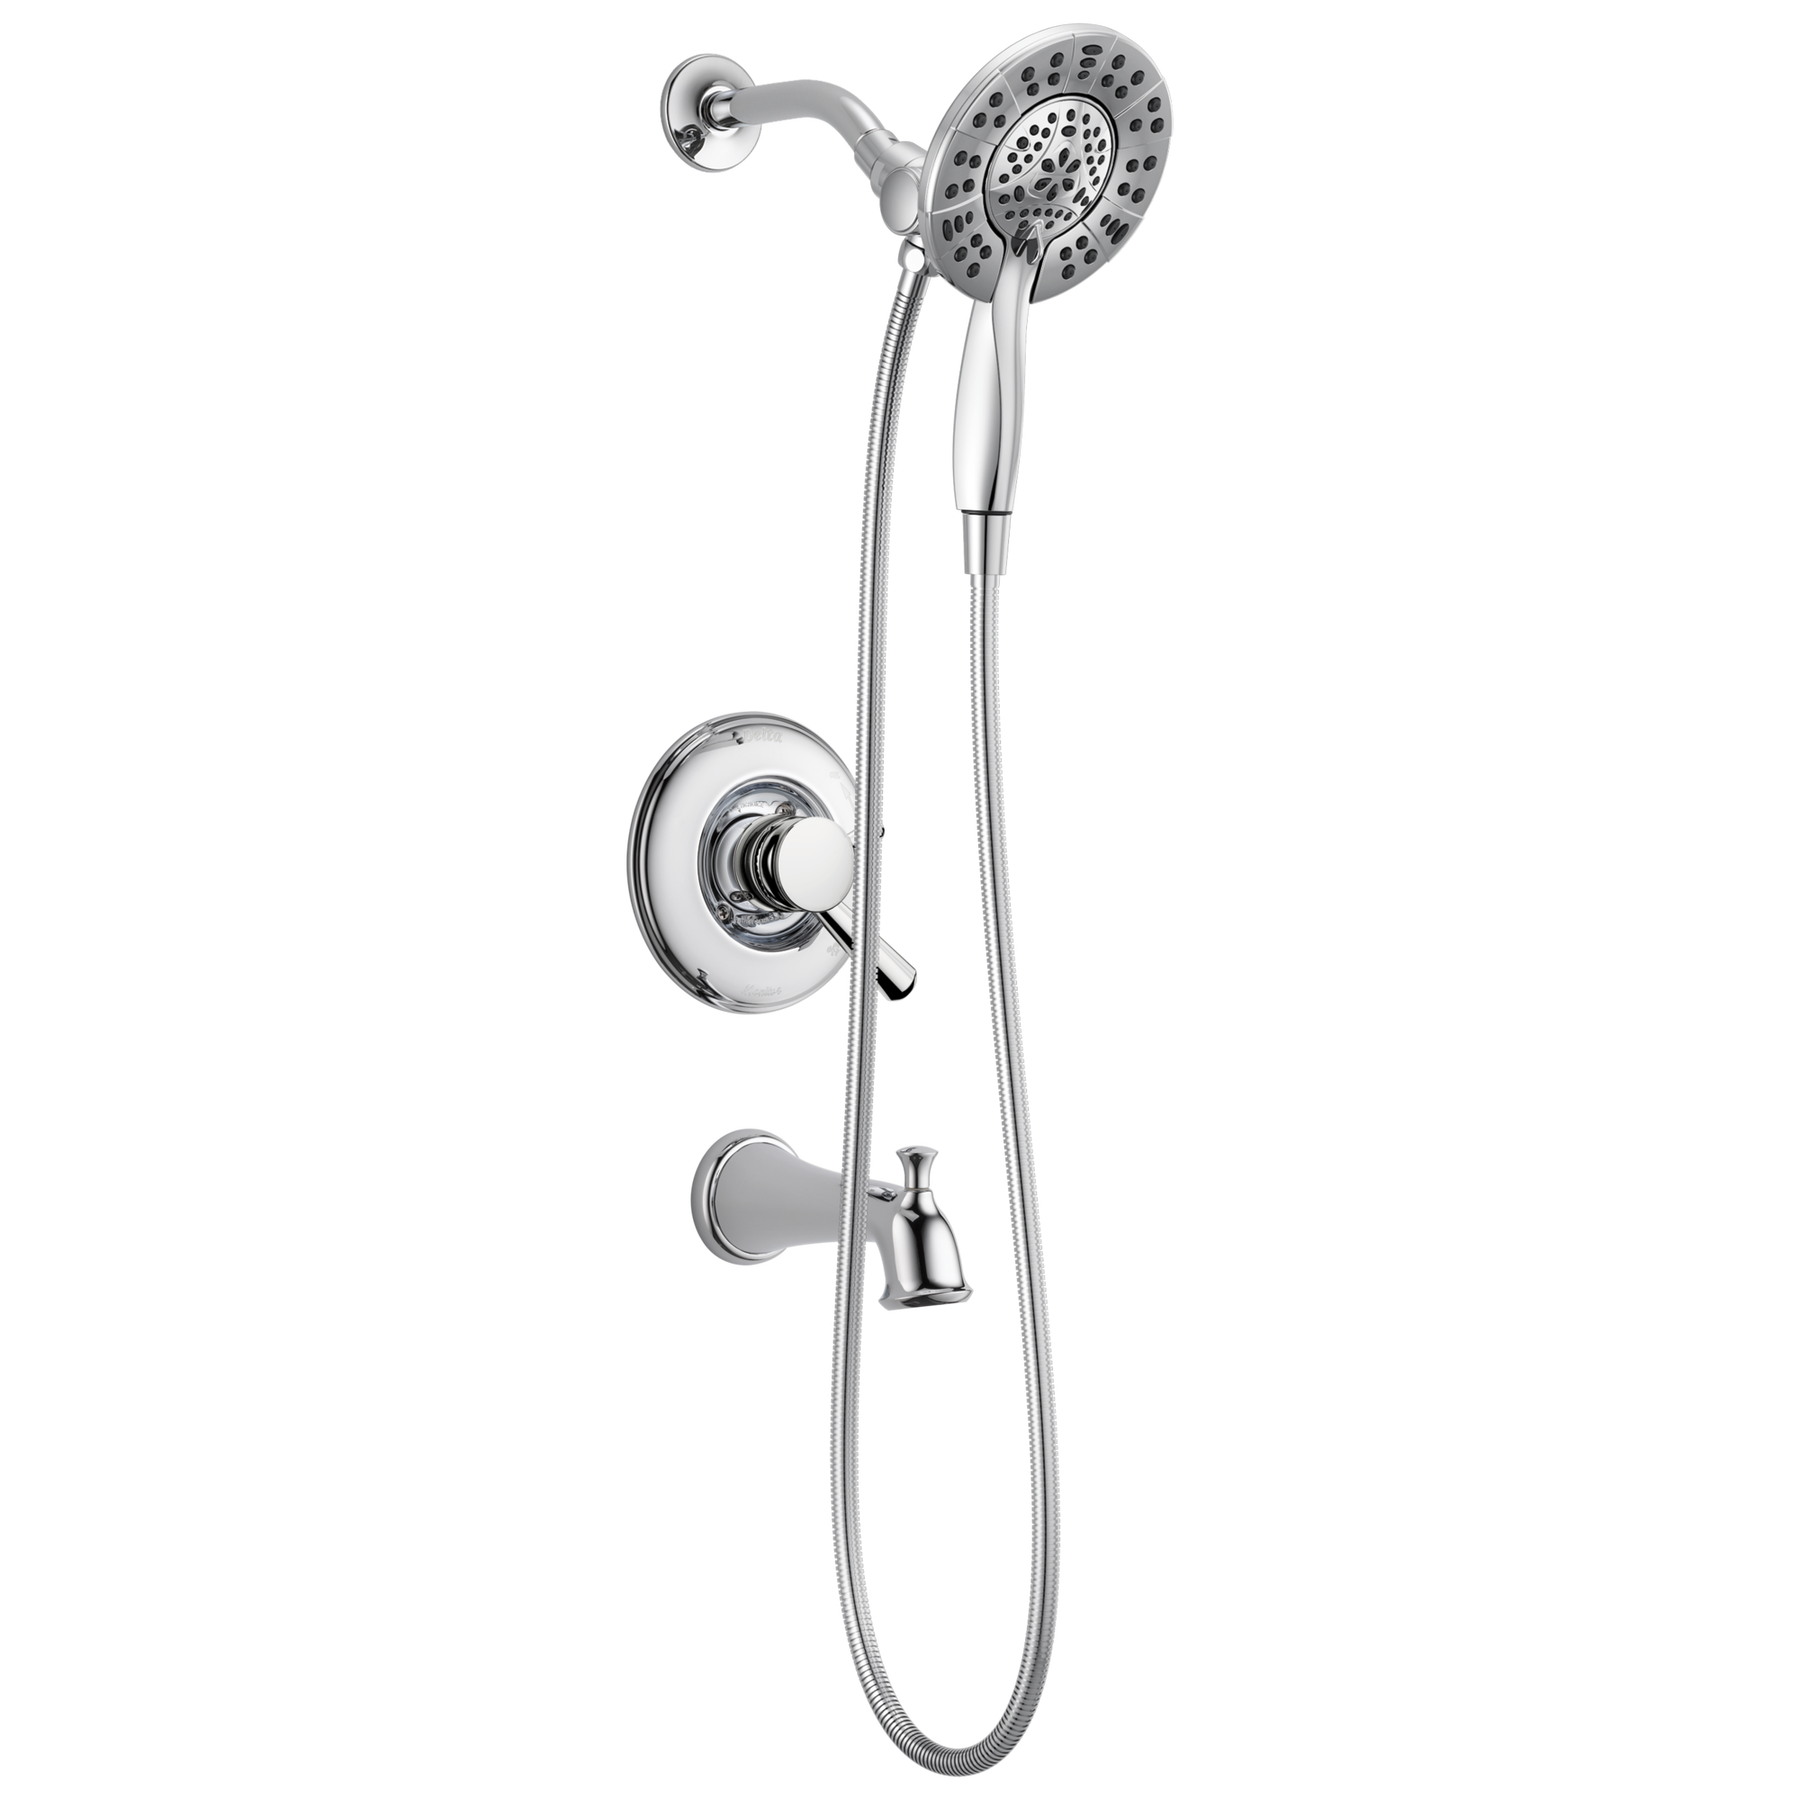 Monitor® 17 Series Tub and Shower Trim with In2ition® Two-in-One Shower in  Chrome